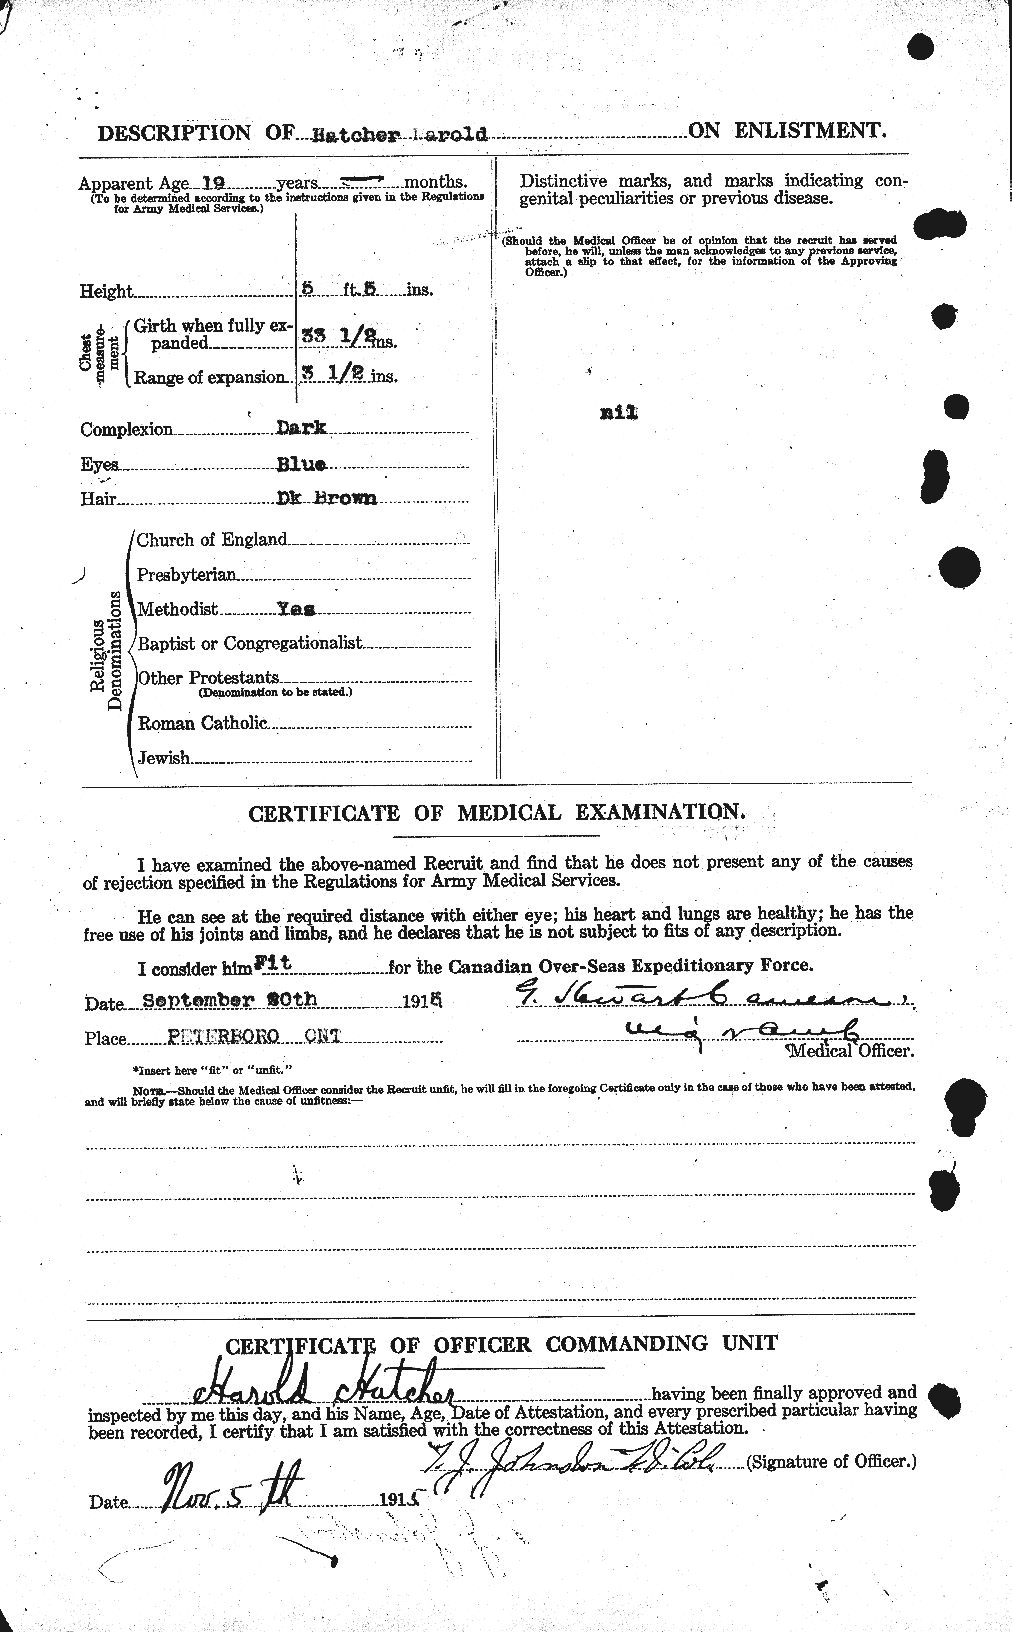 Personnel Records of the First World War - CEF 388743b